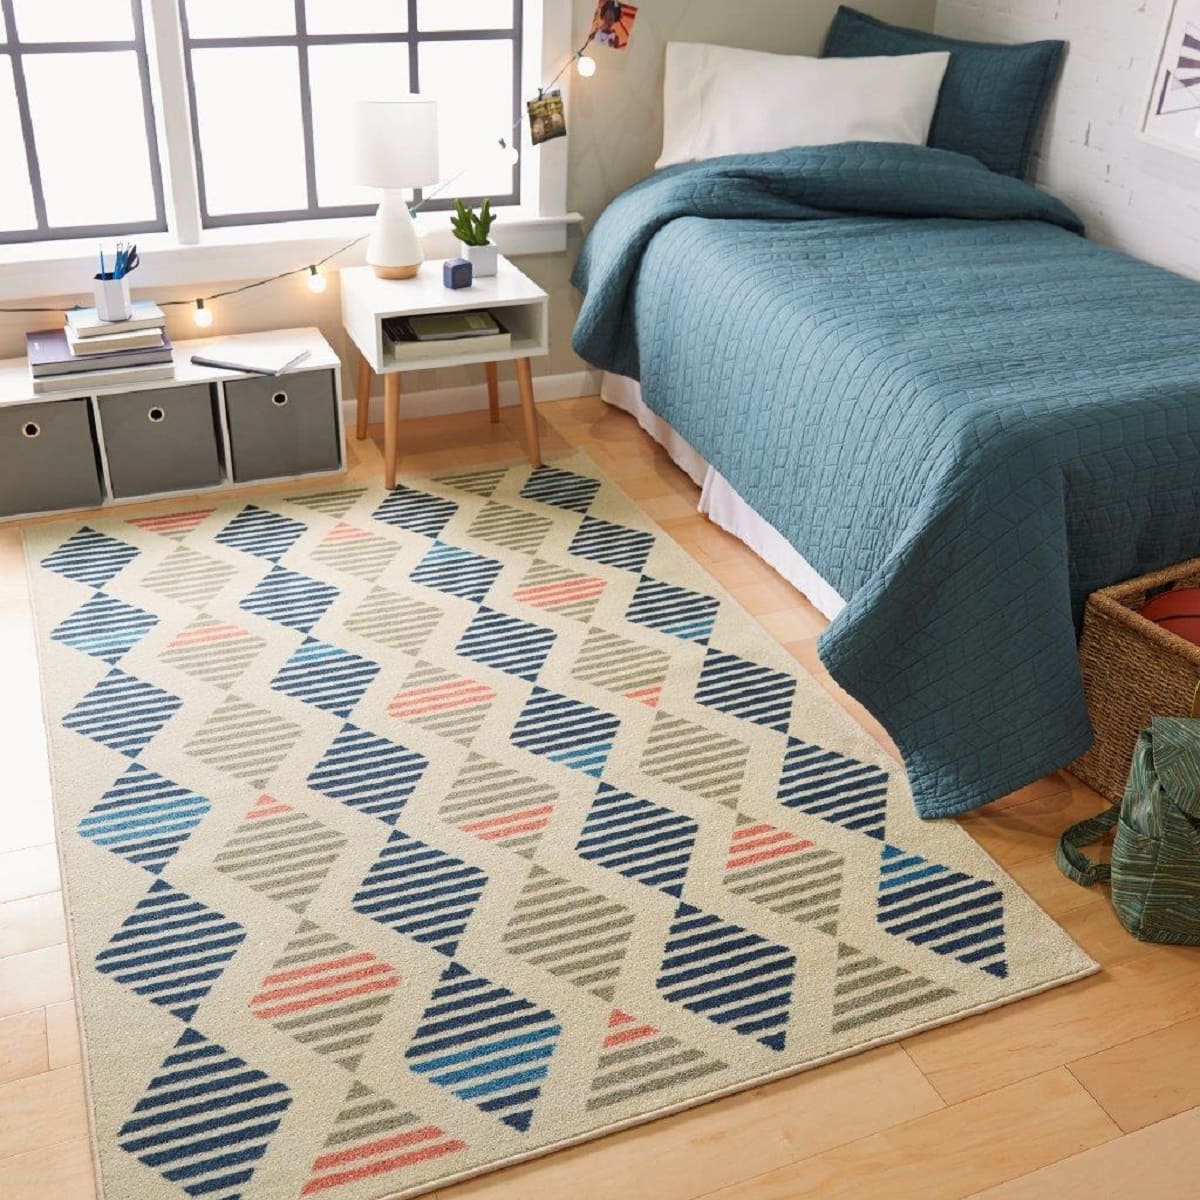 Should You Put A Rug In A Dorm Room? 4 Ways To Style Rugs